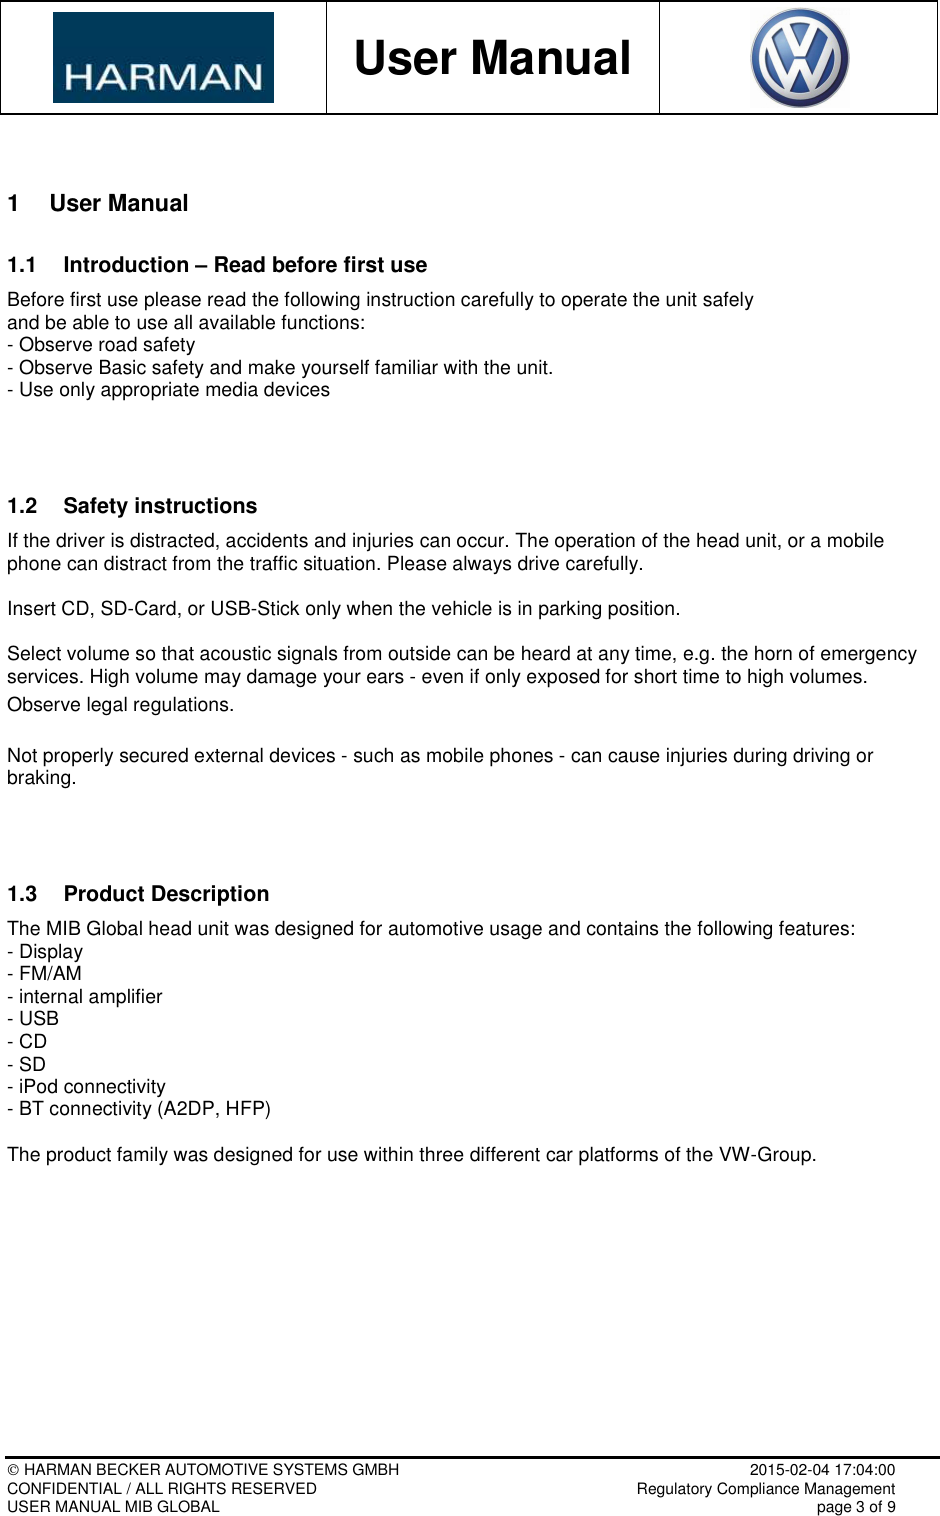           User Manual     HARMAN BECKER AUTOMOTIVE SYSTEMS GMBH    2015-02-04 17:04:00 CONFIDENTIAL / ALL RIGHTS RESERVED     Regulatory Compliance Management USER MANUAL MIB GLOBAL    page 3 of 9  1  User Manual 1.1  Introduction – Read before first use Before first use please read the following instruction carefully to operate the unit safely  and be able to use all available functions: - Observe road safety - Observe Basic safety and make yourself familiar with the unit. - Use only appropriate media devices   1.2  Safety instructions If the driver is distracted, accidents and injuries can occur. The operation of the head unit, or a mobile phone can distract from the traffic situation. Please always drive carefully.  Insert CD, SD-Card, or USB-Stick only when the vehicle is in parking position.  Select volume so that acoustic signals from outside can be heard at any time, e.g. the horn of emergency services. High volume may damage your ears - even if only exposed for short time to high volumes. Observe legal regulations.  Not properly secured external devices - such as mobile phones - can cause injuries during driving or braking.   1.3  Product Description  The MIB Global head unit was designed for automotive usage and contains the following features:  - Display - FM/AM - internal amplifier - USB - CD - SD - iPod connectivity - BT connectivity (A2DP, HFP)  The product family was designed for use within three different car platforms of the VW-Group.          